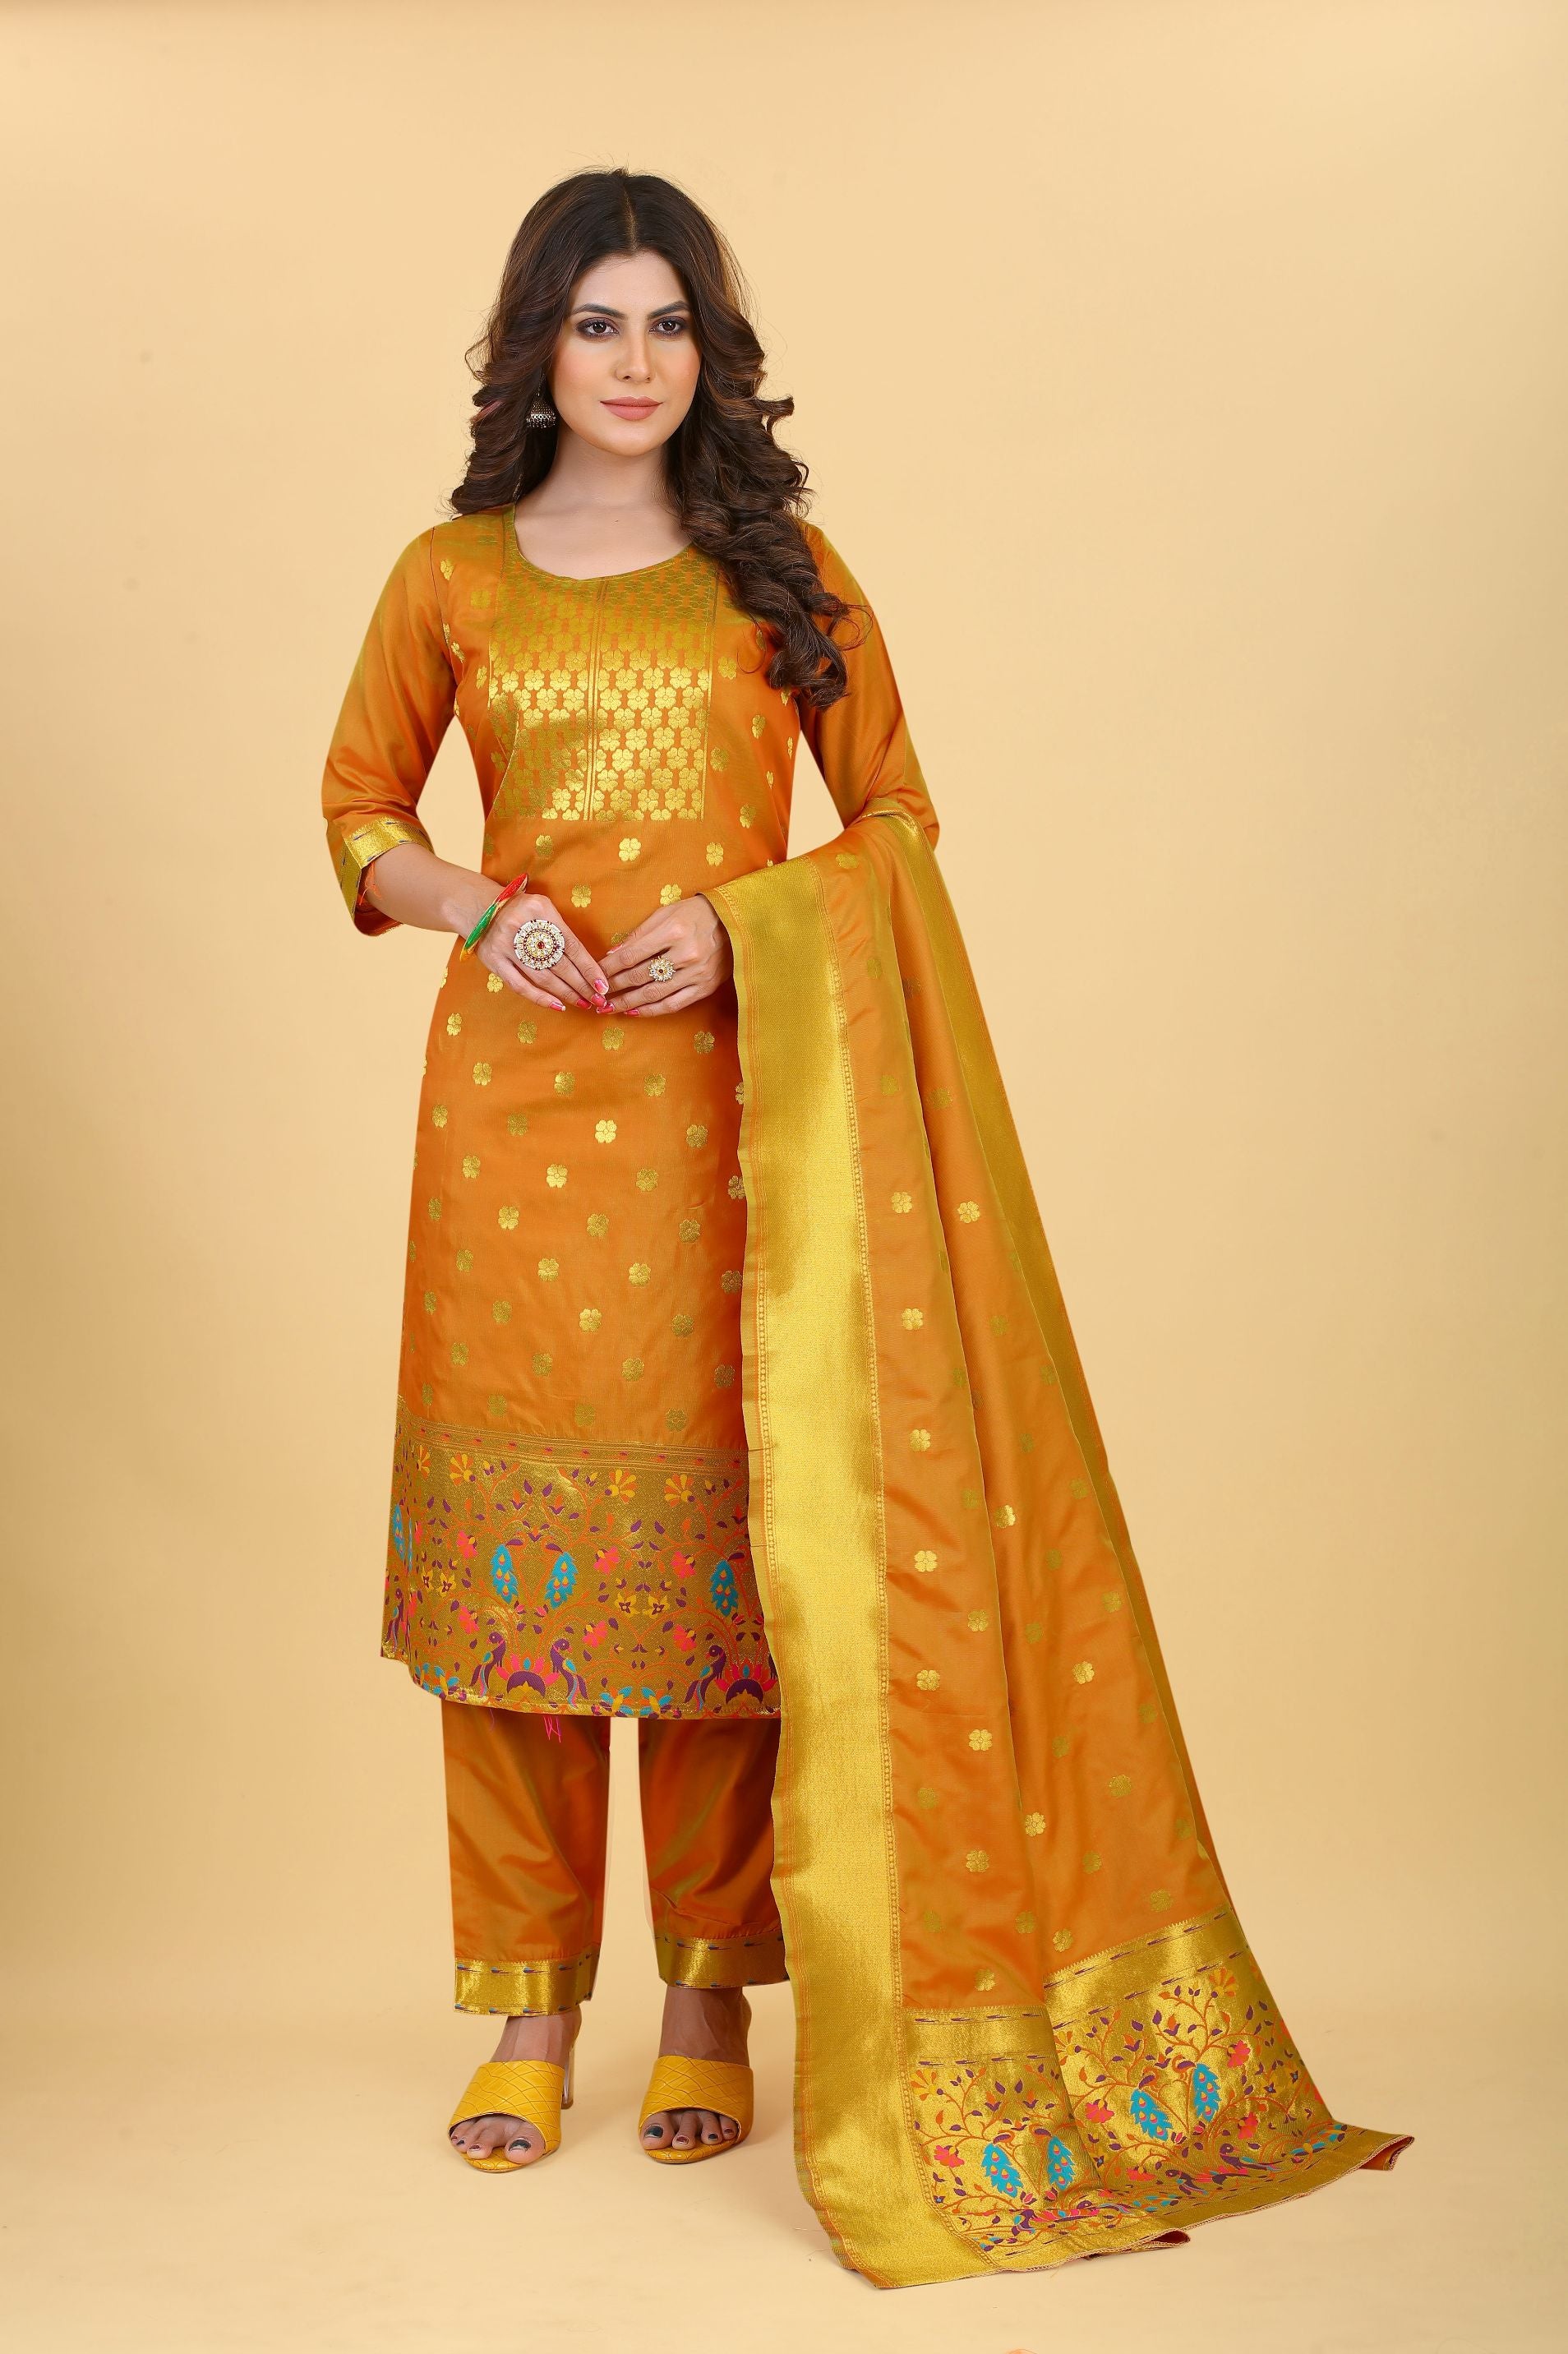 Orange Color Part Wear Dress material for suits in Paithani Style